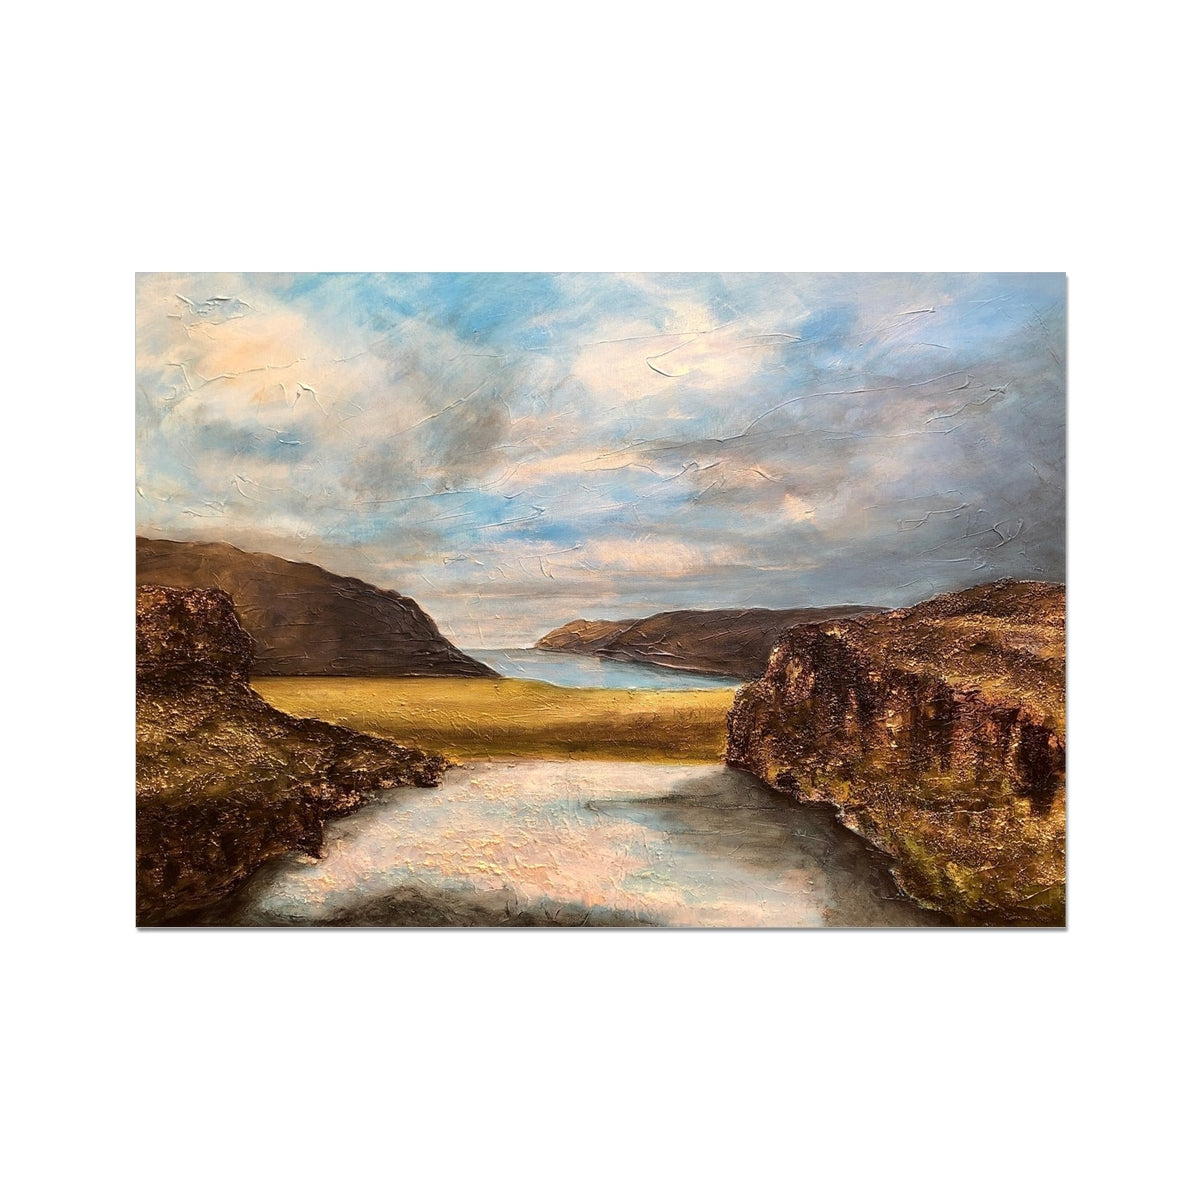 Westfjords Iceland Painting | Fine Art Prints From Scotland-Unframed Prints-World Art Gallery-A2 Landscape-Paintings, Prints, Homeware, Art Gifts From Scotland By Scottish Artist Kevin Hunter